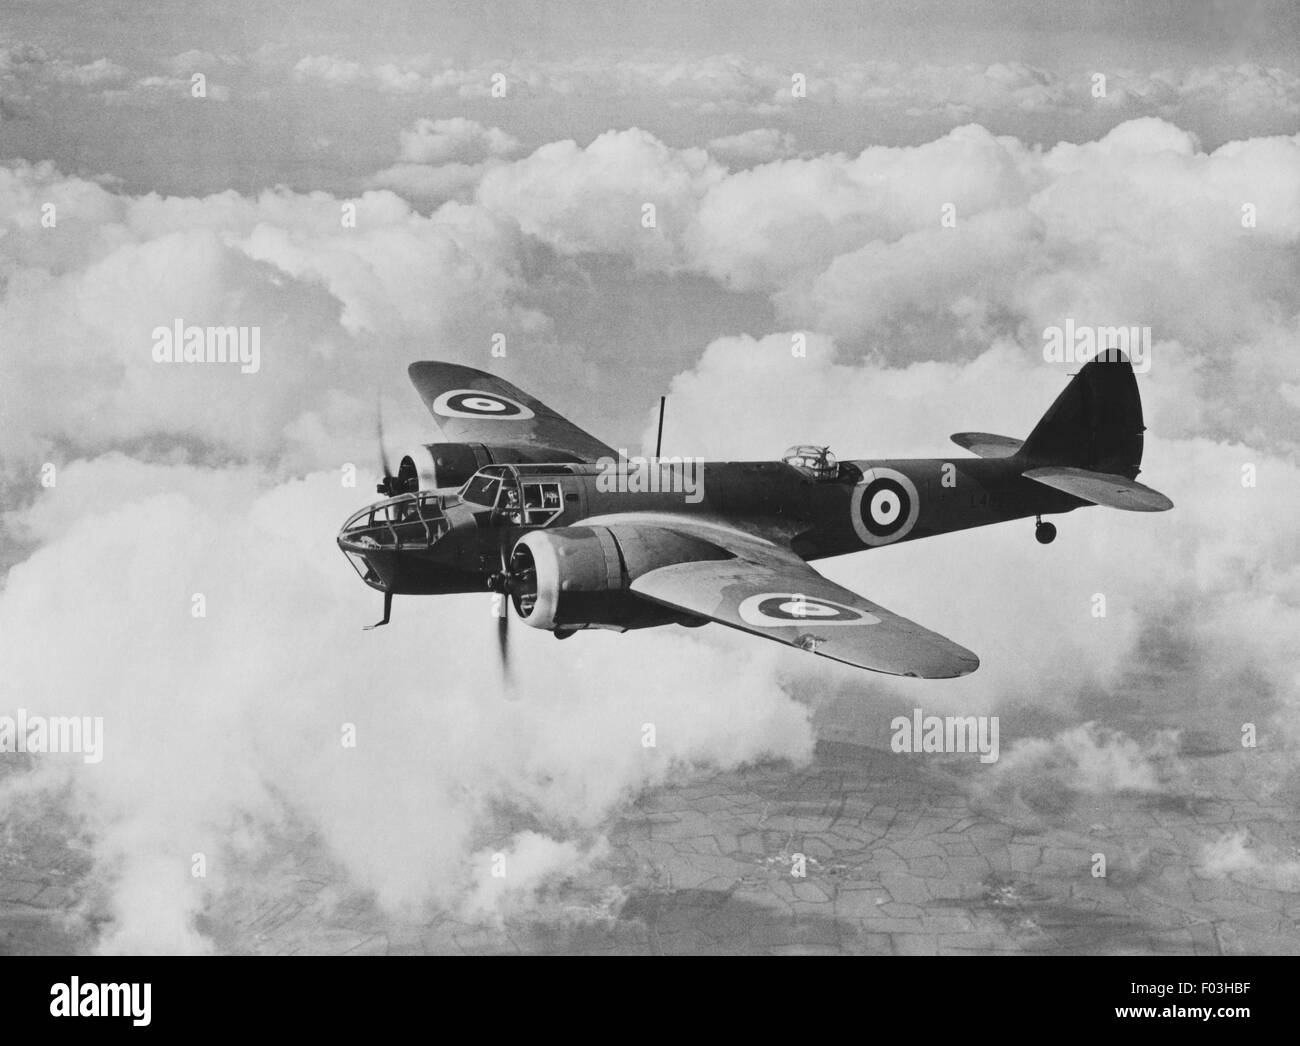 'Bristol' Blenheim Bomber. 'Bristol' Type 142M. Two 'Bristol' 840 h.p. Mercury engines. The first all-metal modern twin-engined monoplane for the R.A.F. to carry the whole of the military load within the structure. Saw service with all the Commands of the R.A.F. and in all theatres of war. Made the first air raid of the war over Keil, in September 1939. Stock Photo